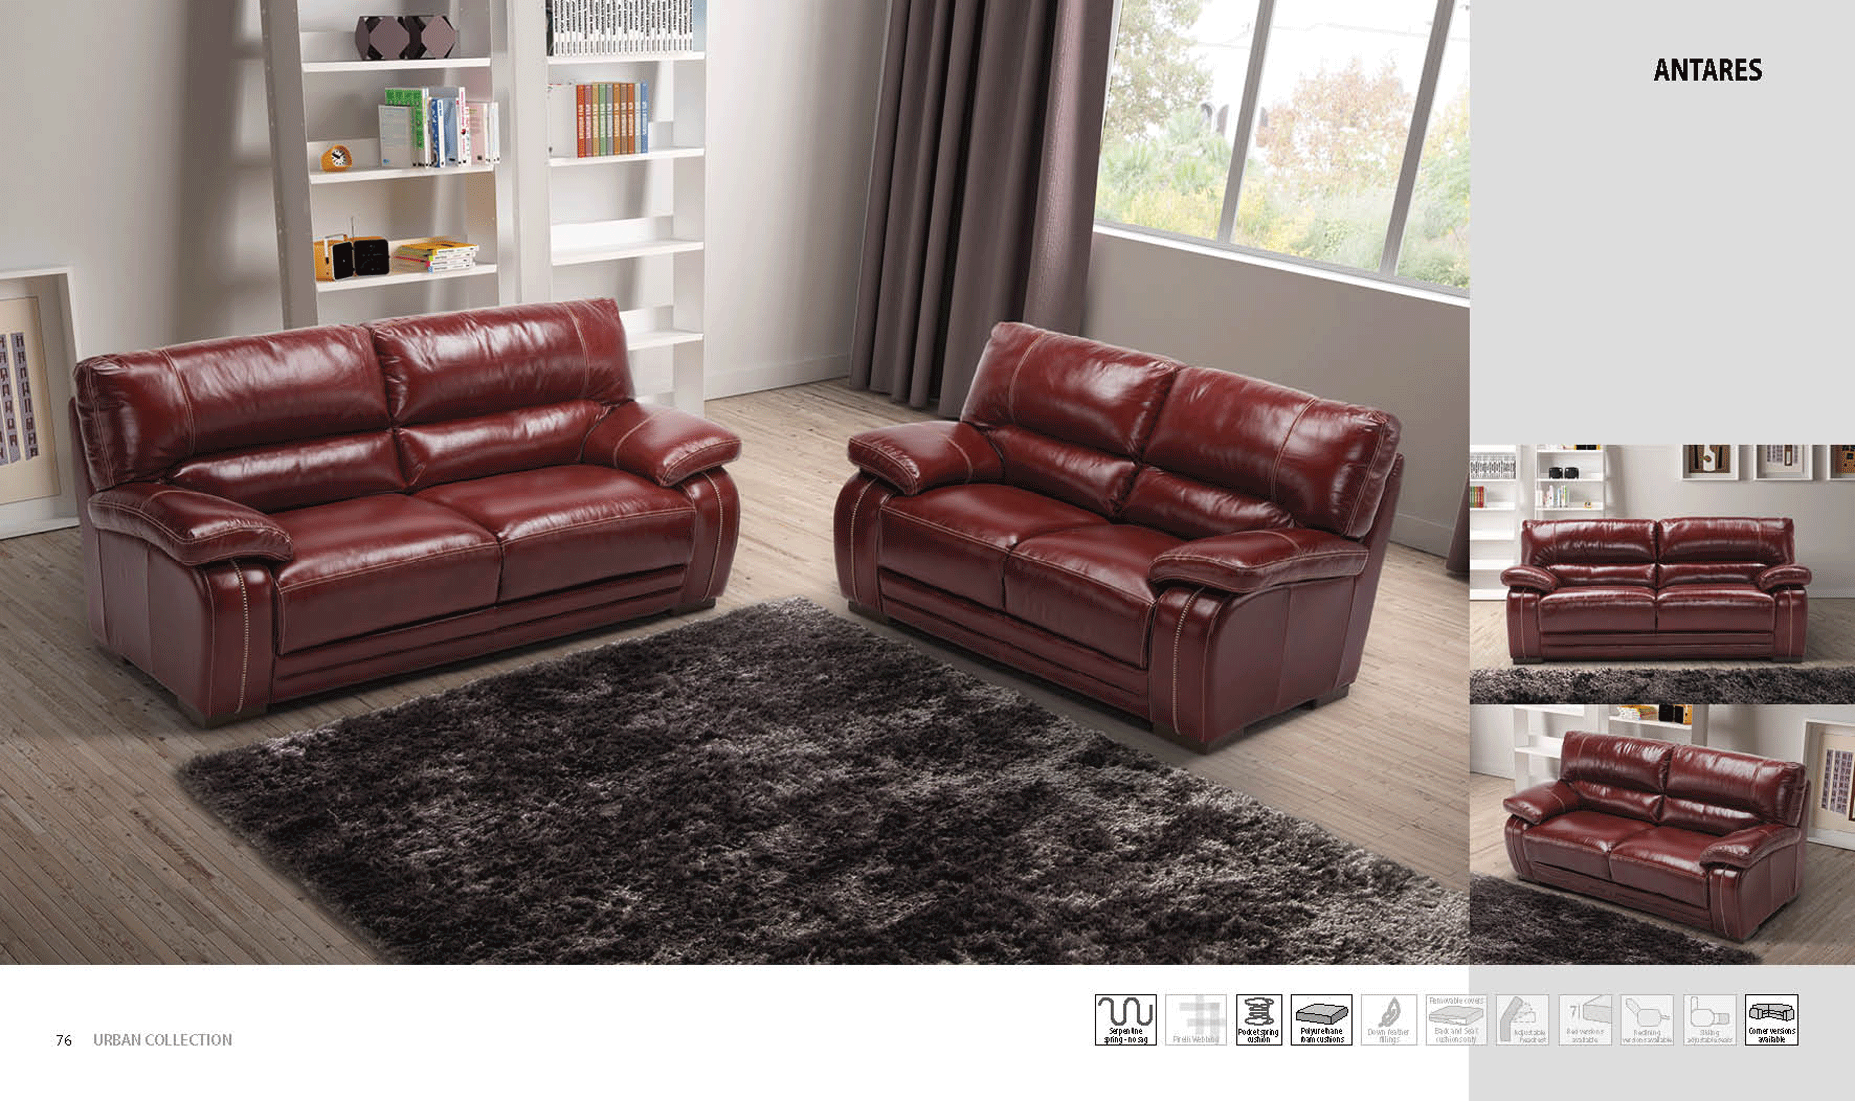 Living Room Furniture Sofas Loveseats and Chairs Antares